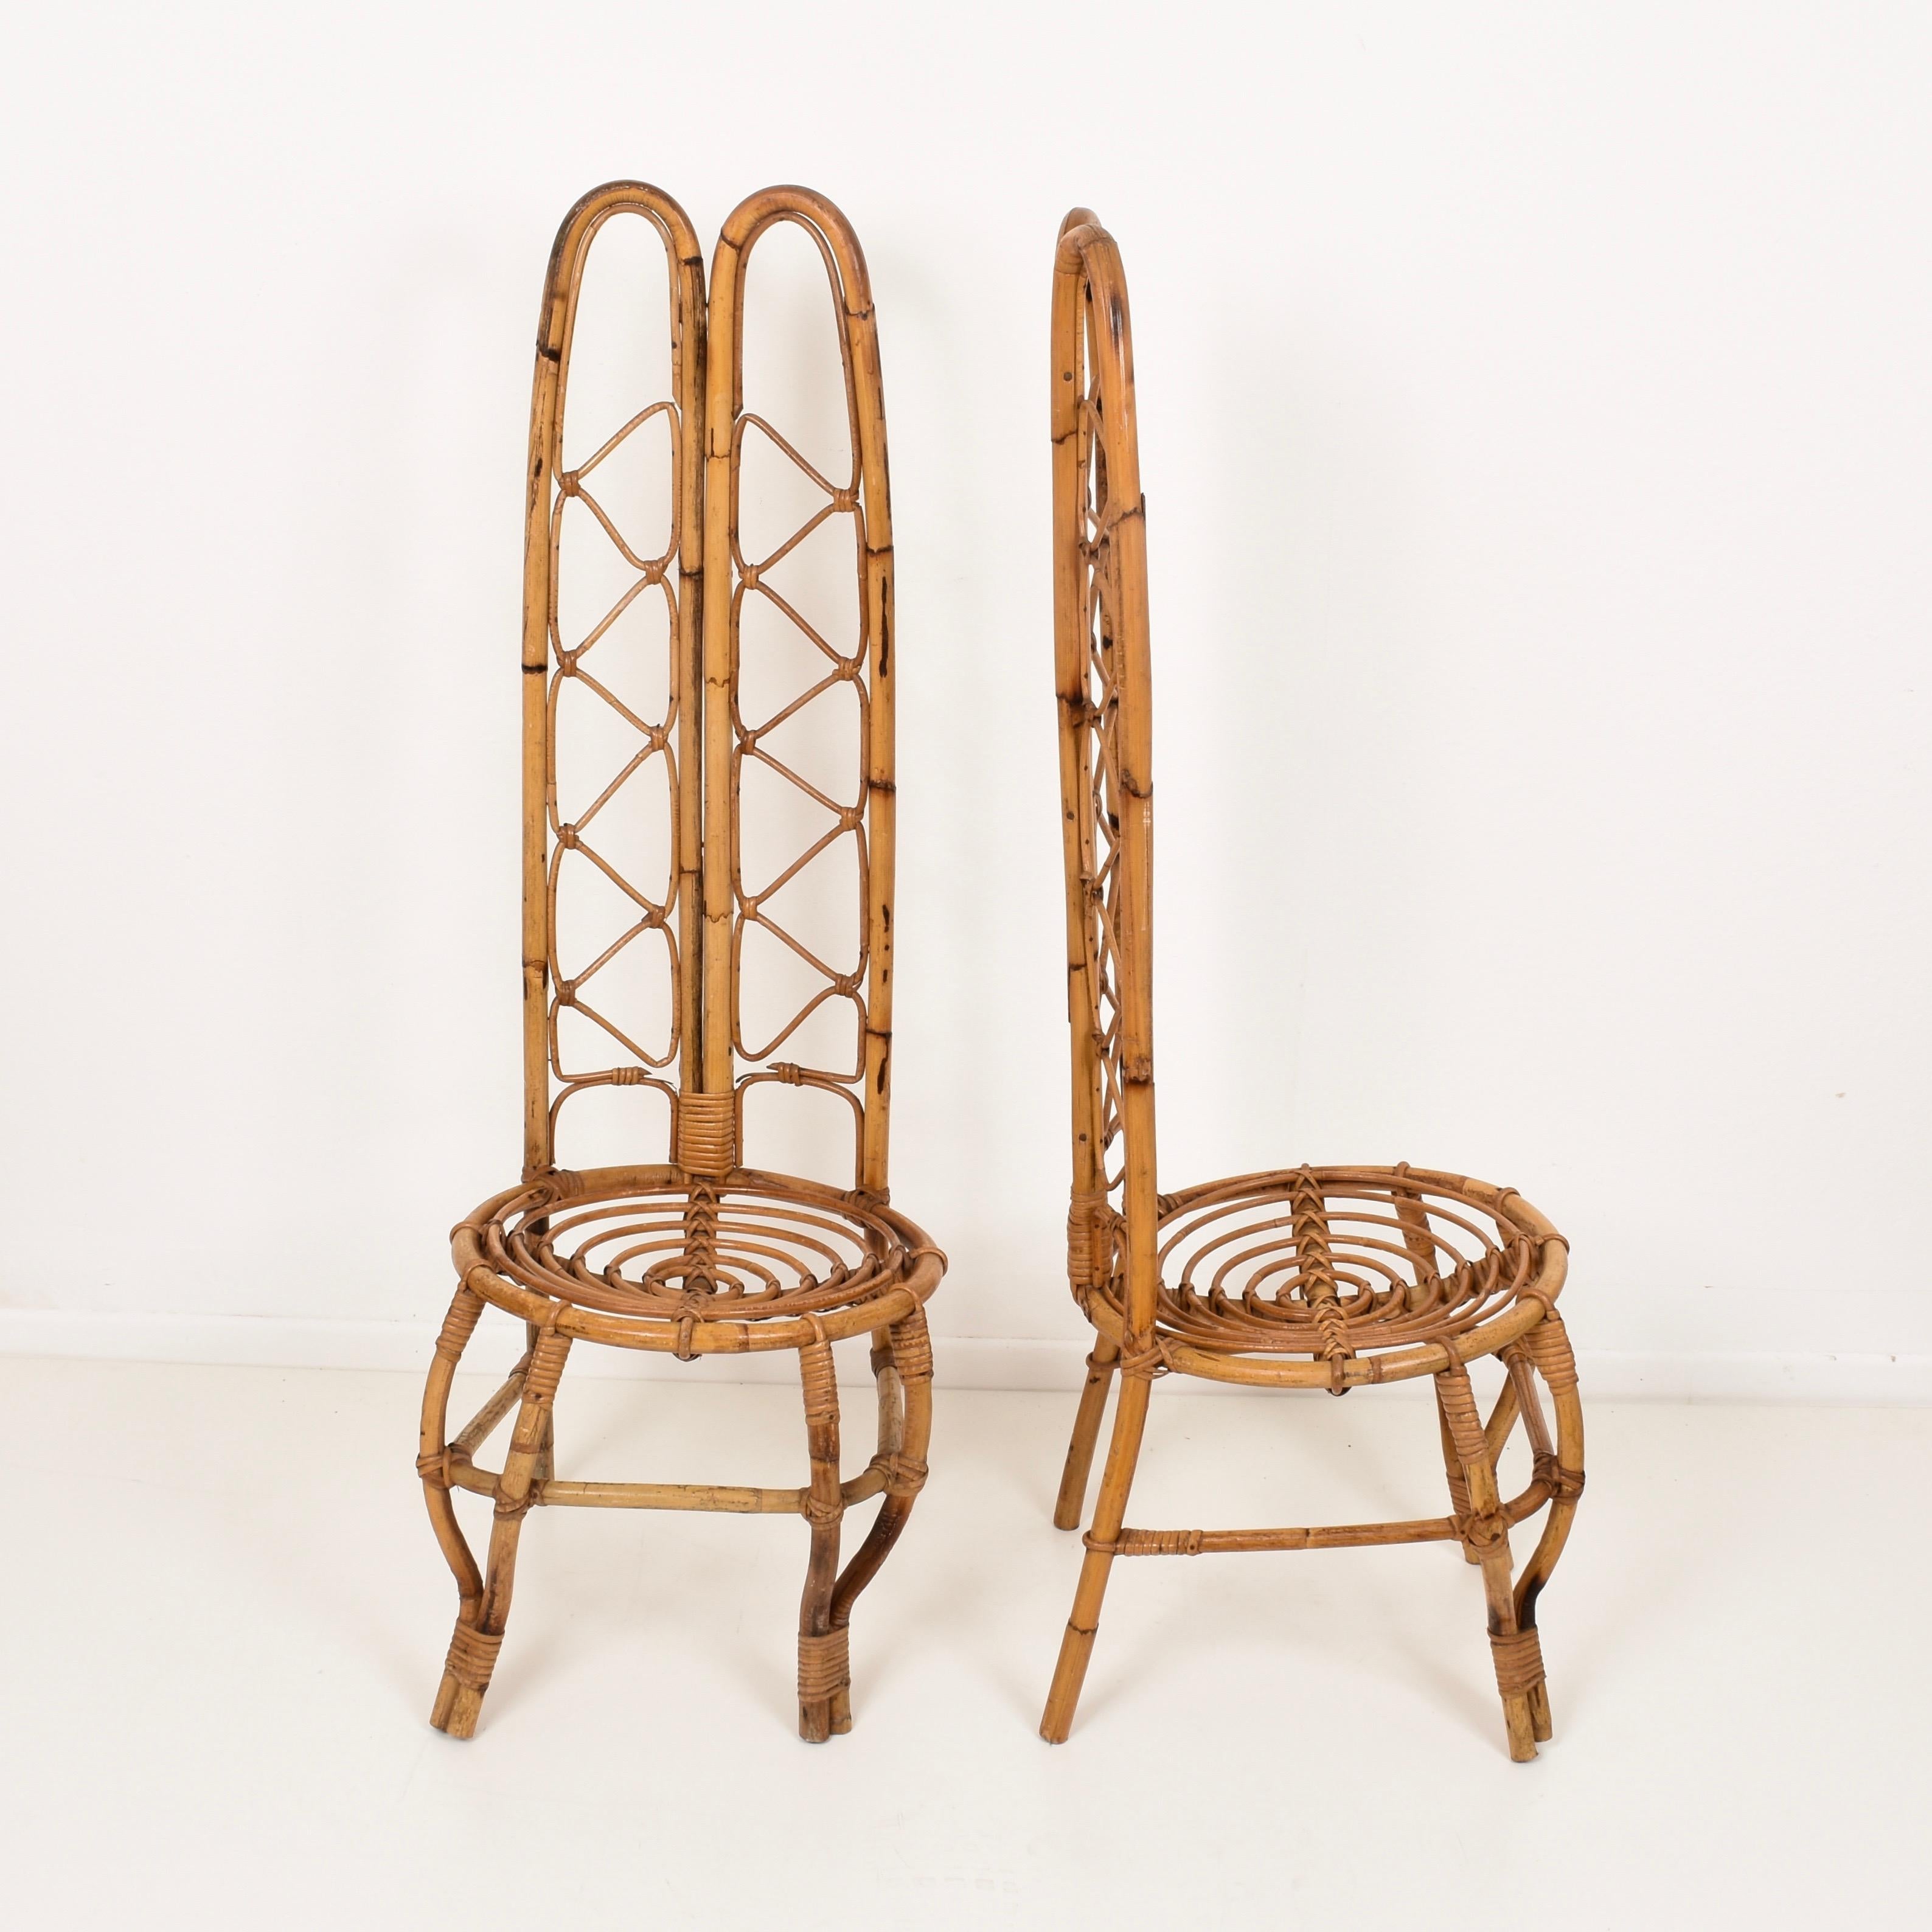 20th Century Set of Two, Rattan and Bamboo Chairs on the French Riviera, France of the 1960s